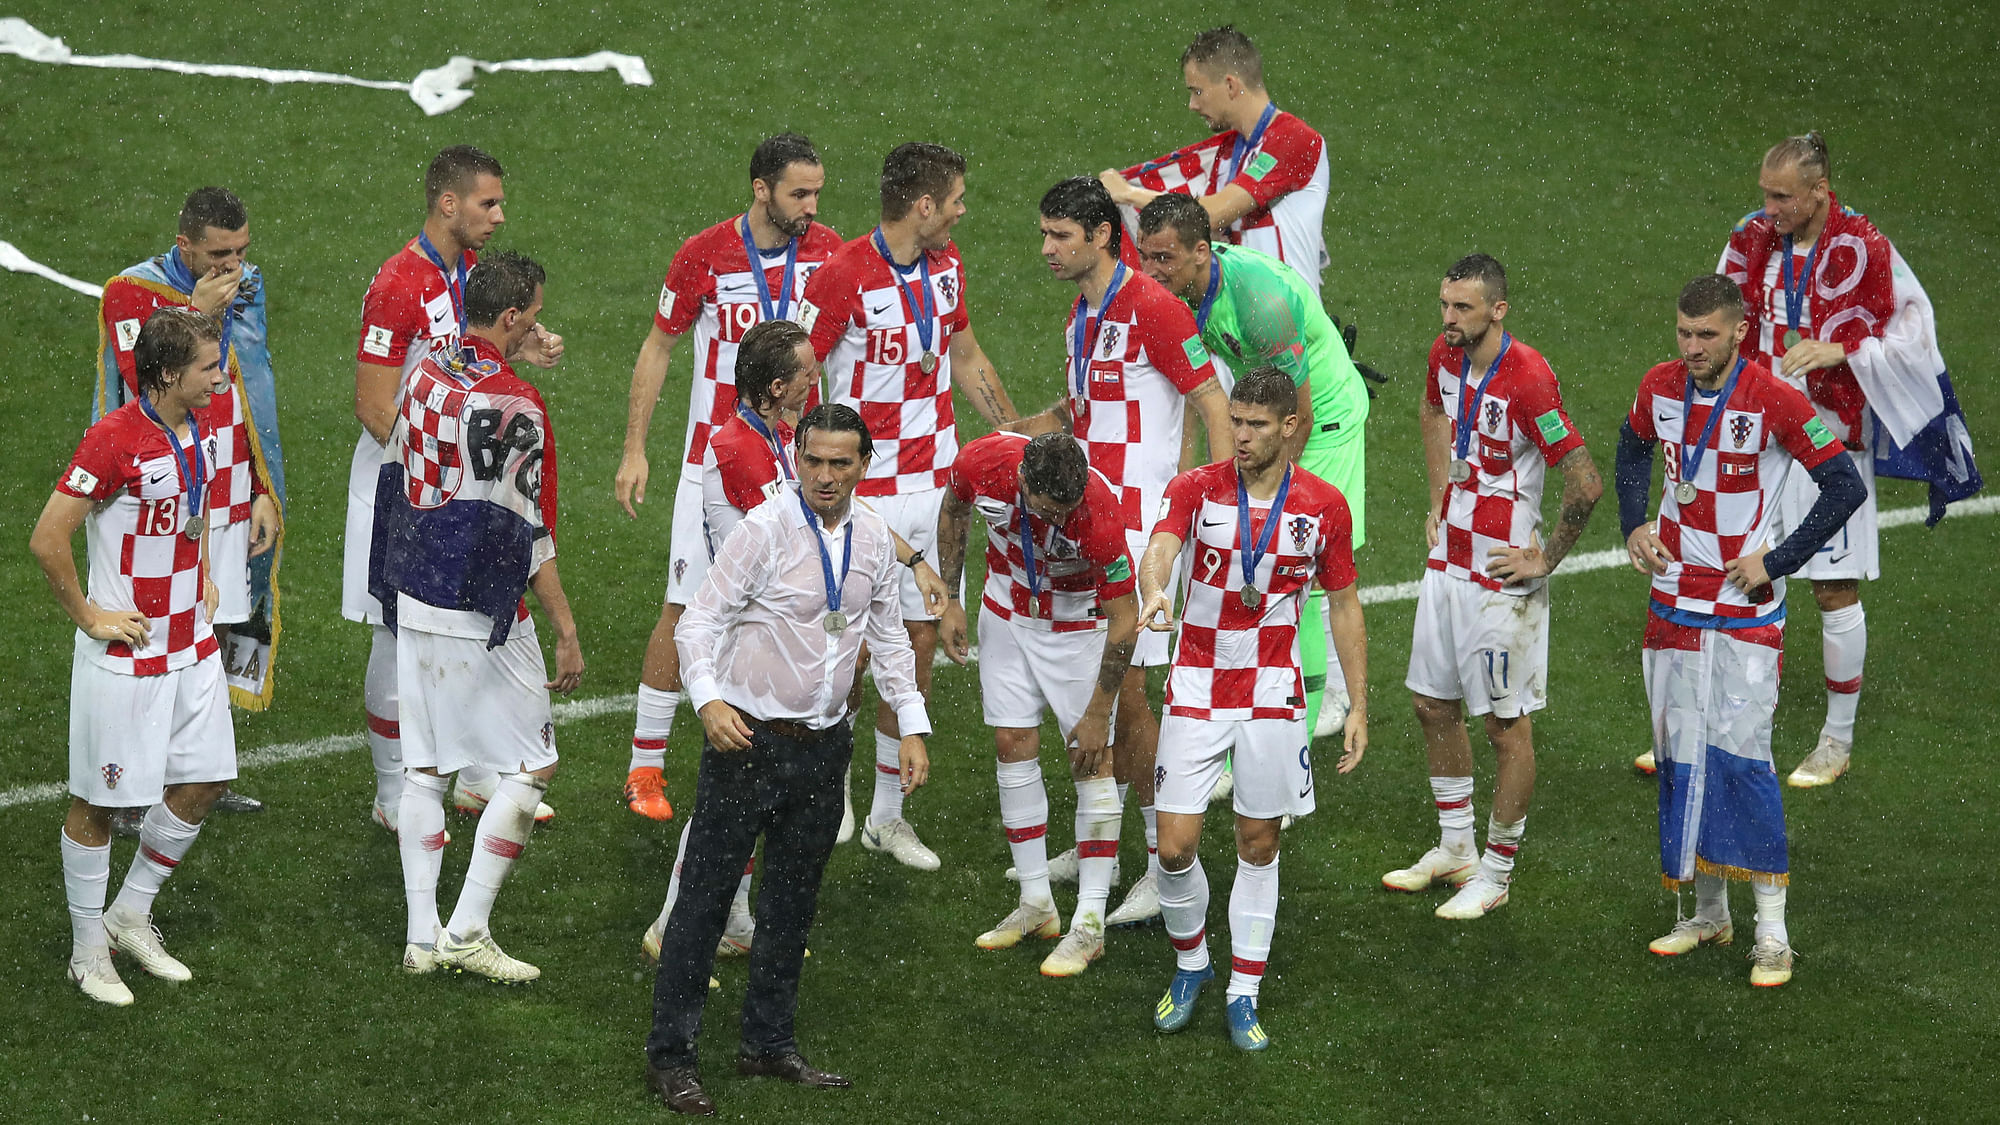 Croatia coach Zlatko Dalic told his players they should be proud of their sensational World Cup run.